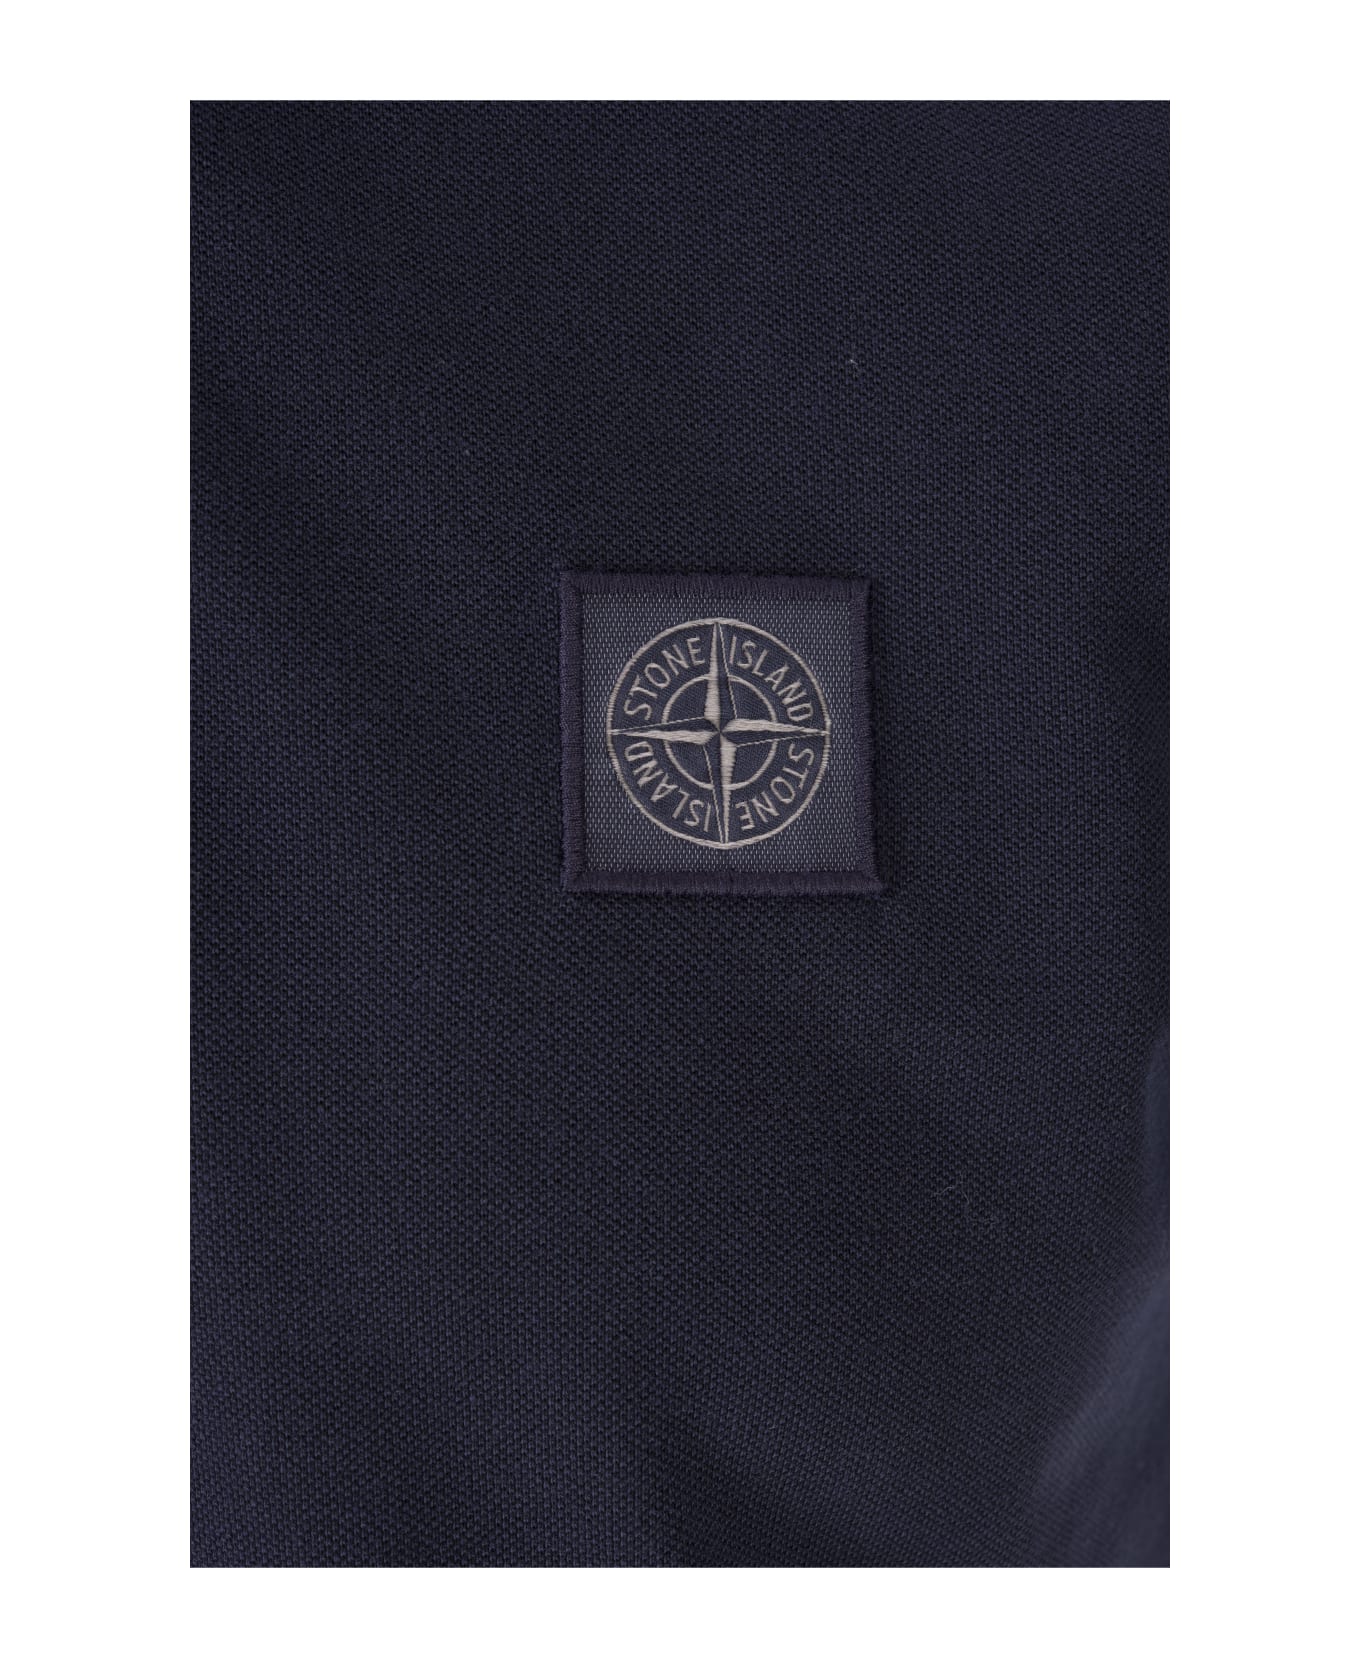 Stone Island Navy Blue Pigment Dyed Slim Fit Polo Shirt - Blue ポロシャツ